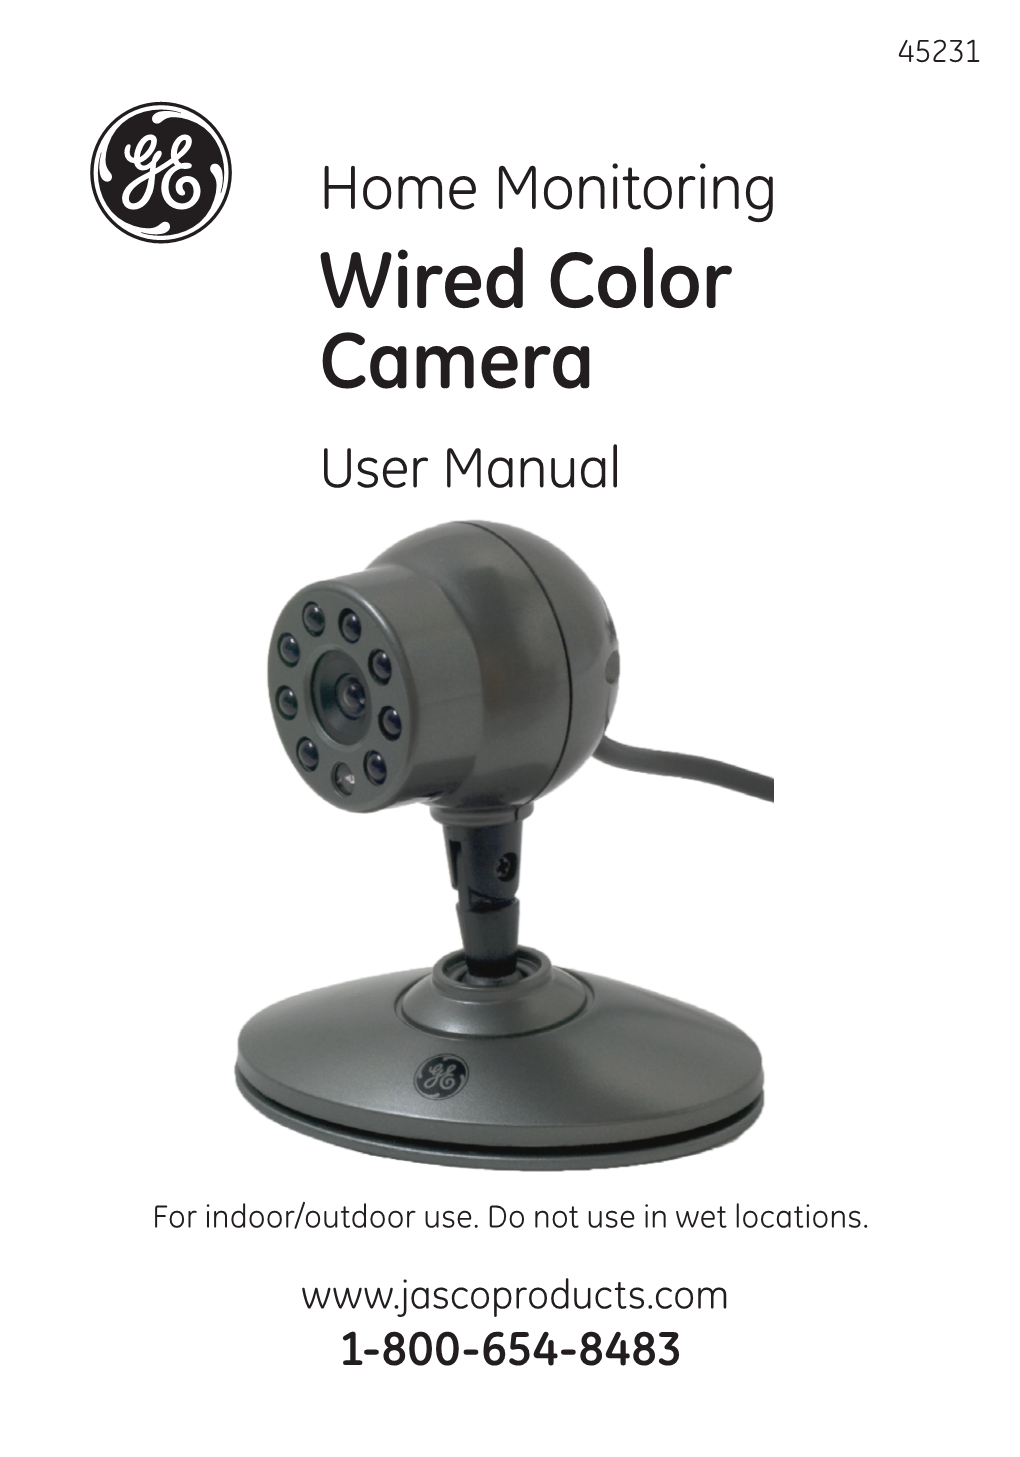 Home Monitoring Wired Color Camera User Manual